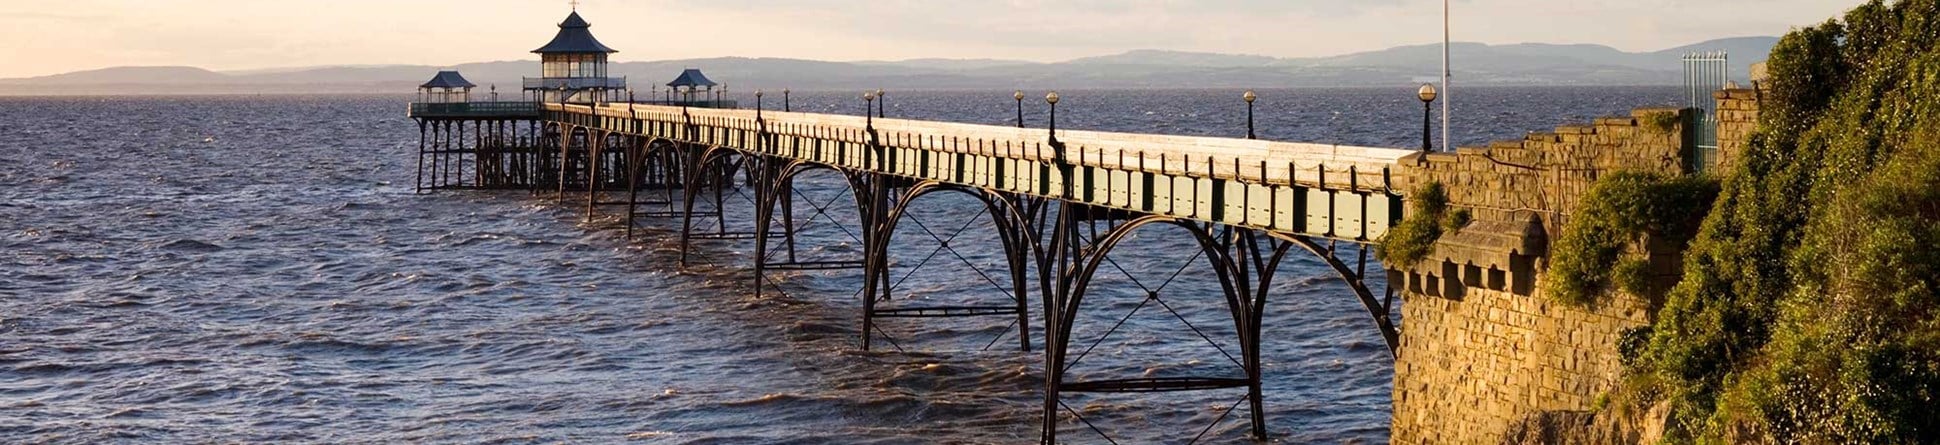 Image of Clevedon Pier, which was described by the poet Sir John Betjeman as "the most beautiful pier in England"